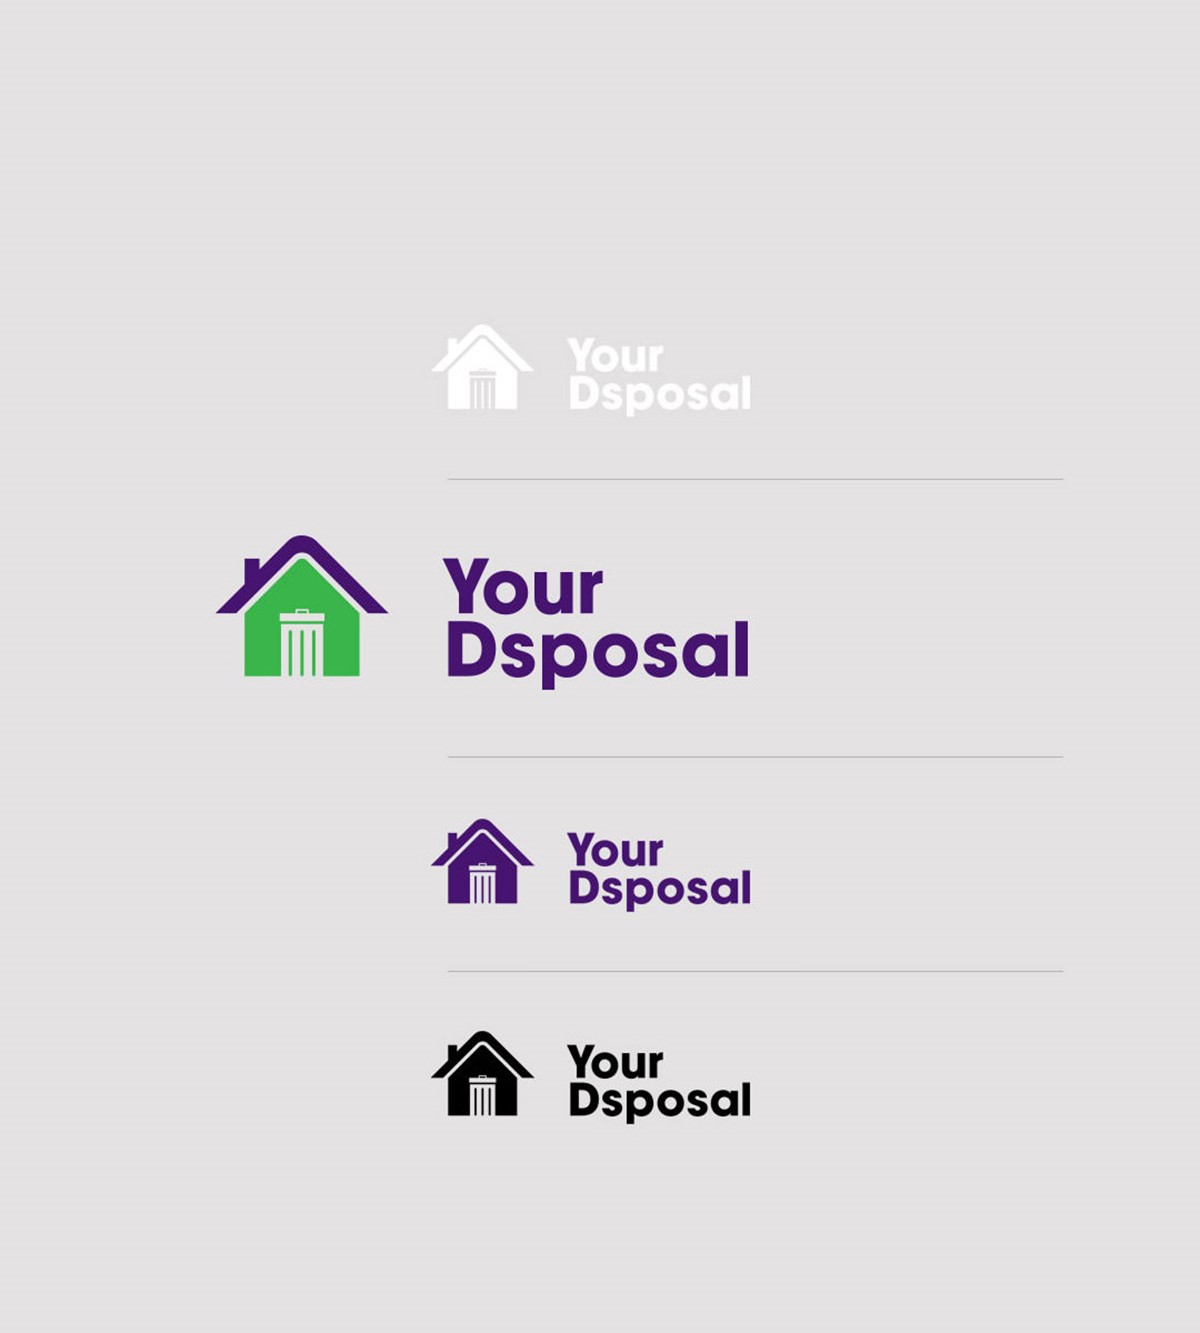 Your Dsposal logo variations. Brand identity by Superfried.